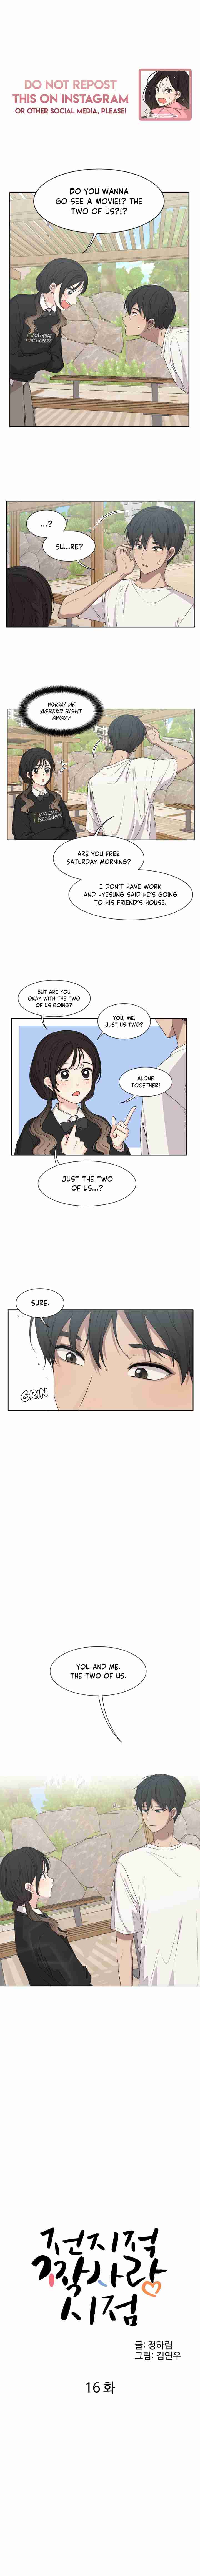 The Omniscient Point of View of an Unrequited Love Ch. 16